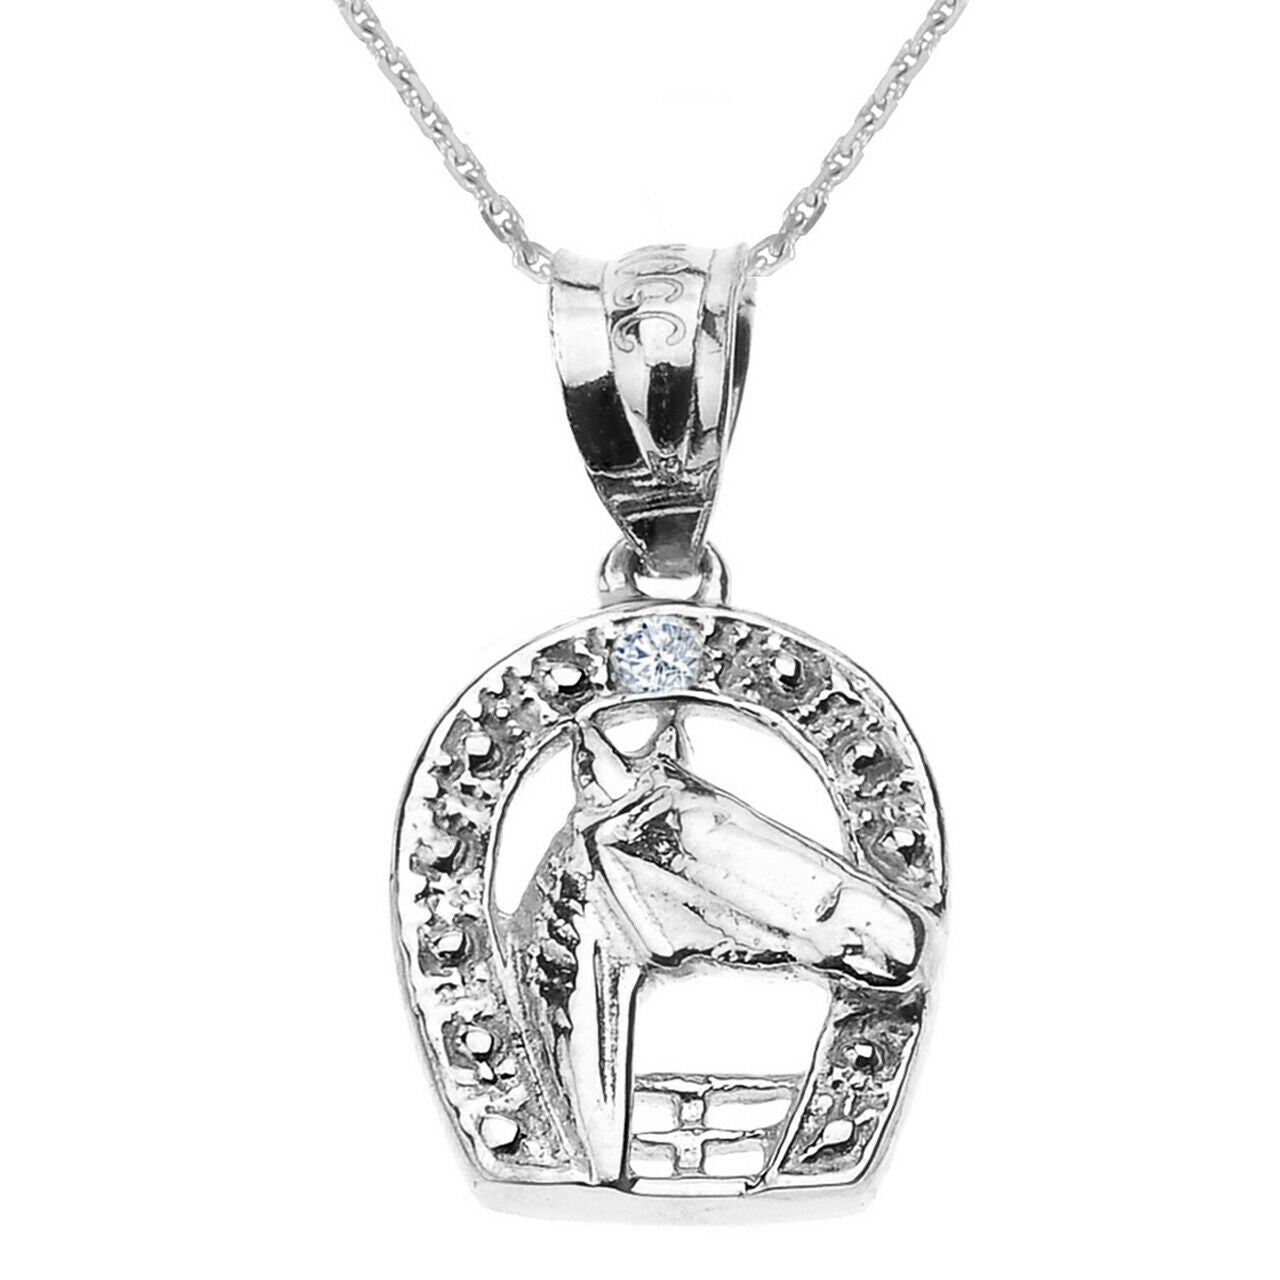 Sterling Silver Diamond Horseshoe with Horse Head Pendant Necklace Made in USA